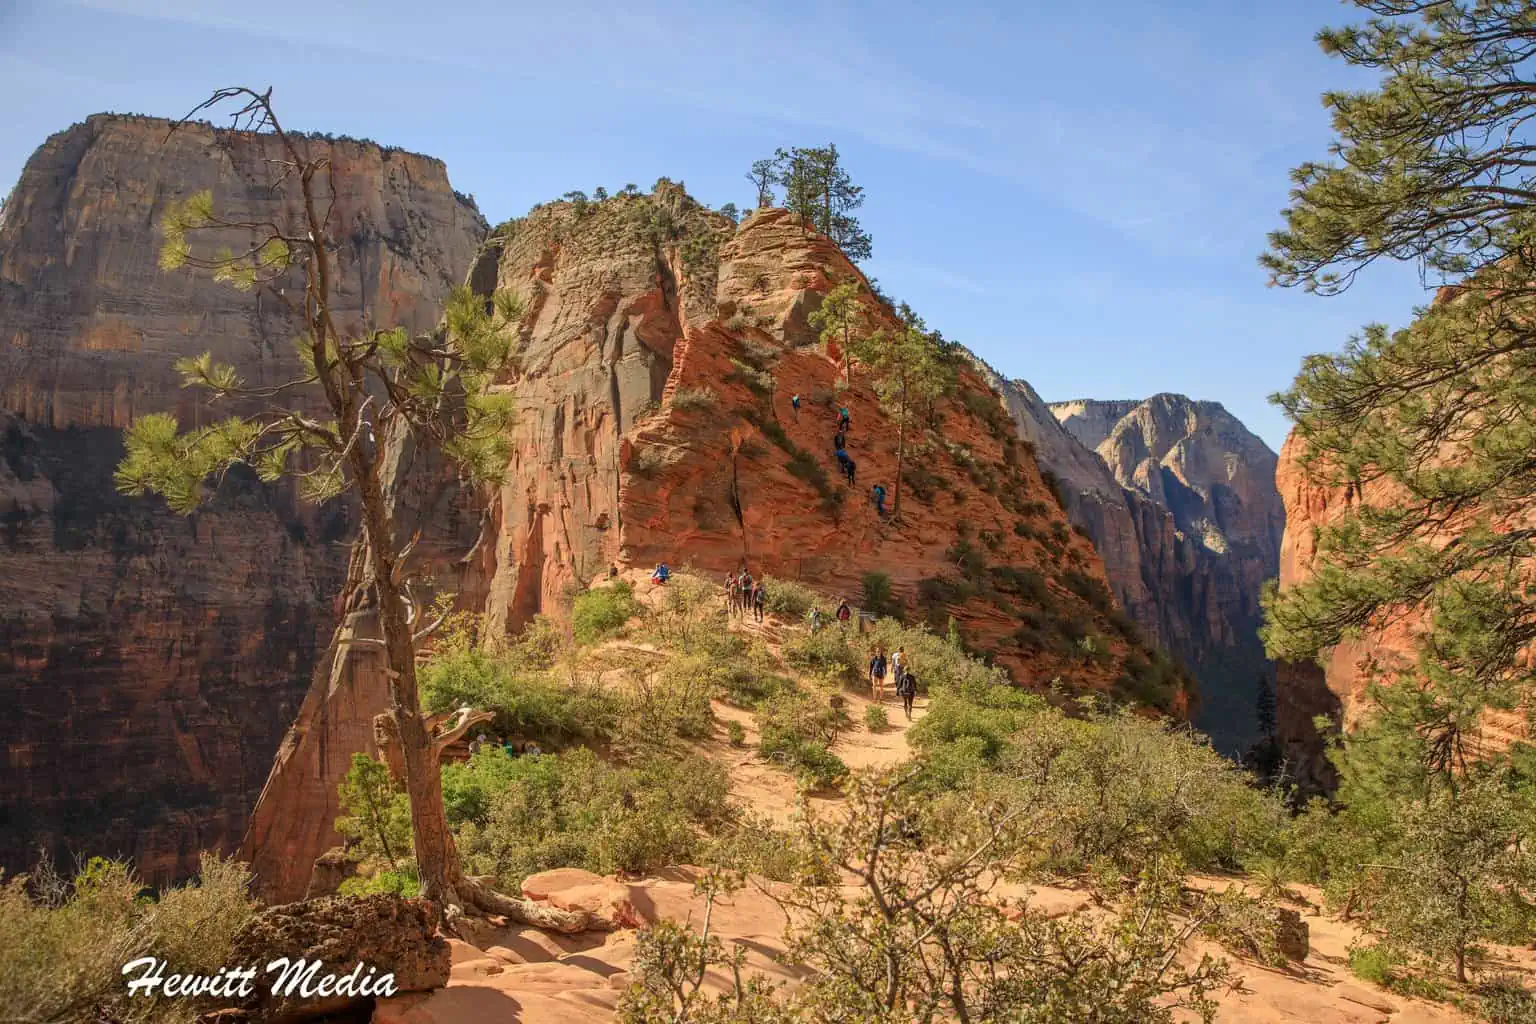 Southwest United States Travel Itinerary - Angel's Landing Trail at Zion National Park